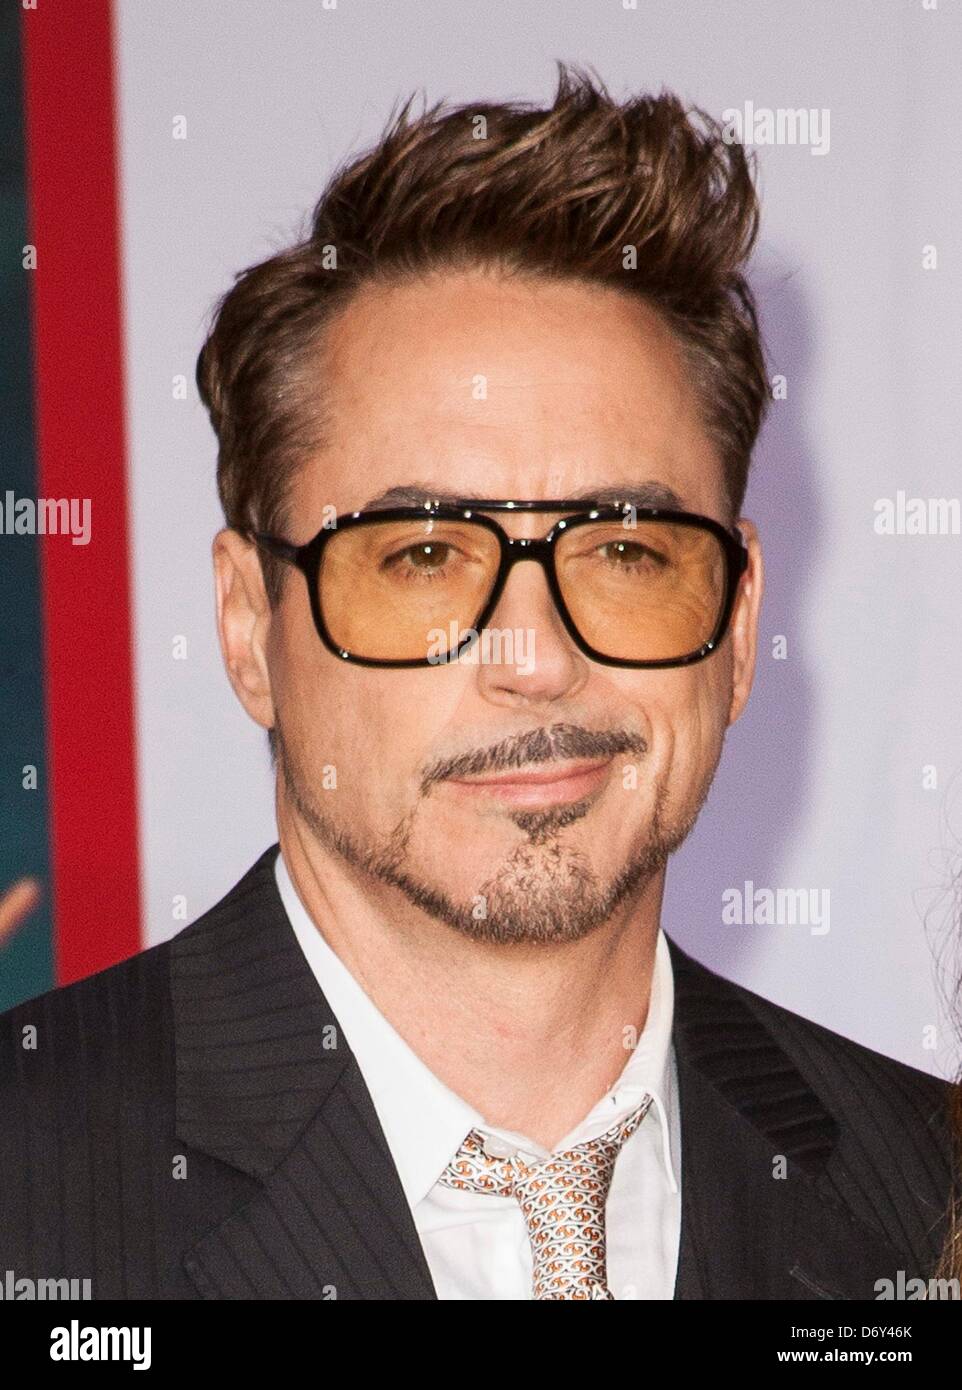 Los Angeles, USA. 24th April, 2013. Robert Downey Jr. at arrivals for IRON MAN 3 Premiere, El Capitan Theatre, Los Angeles, CA April 24, 2013. Photo By: Emiley Schweich/Everett Collection/Alamy Live News Stock Photo